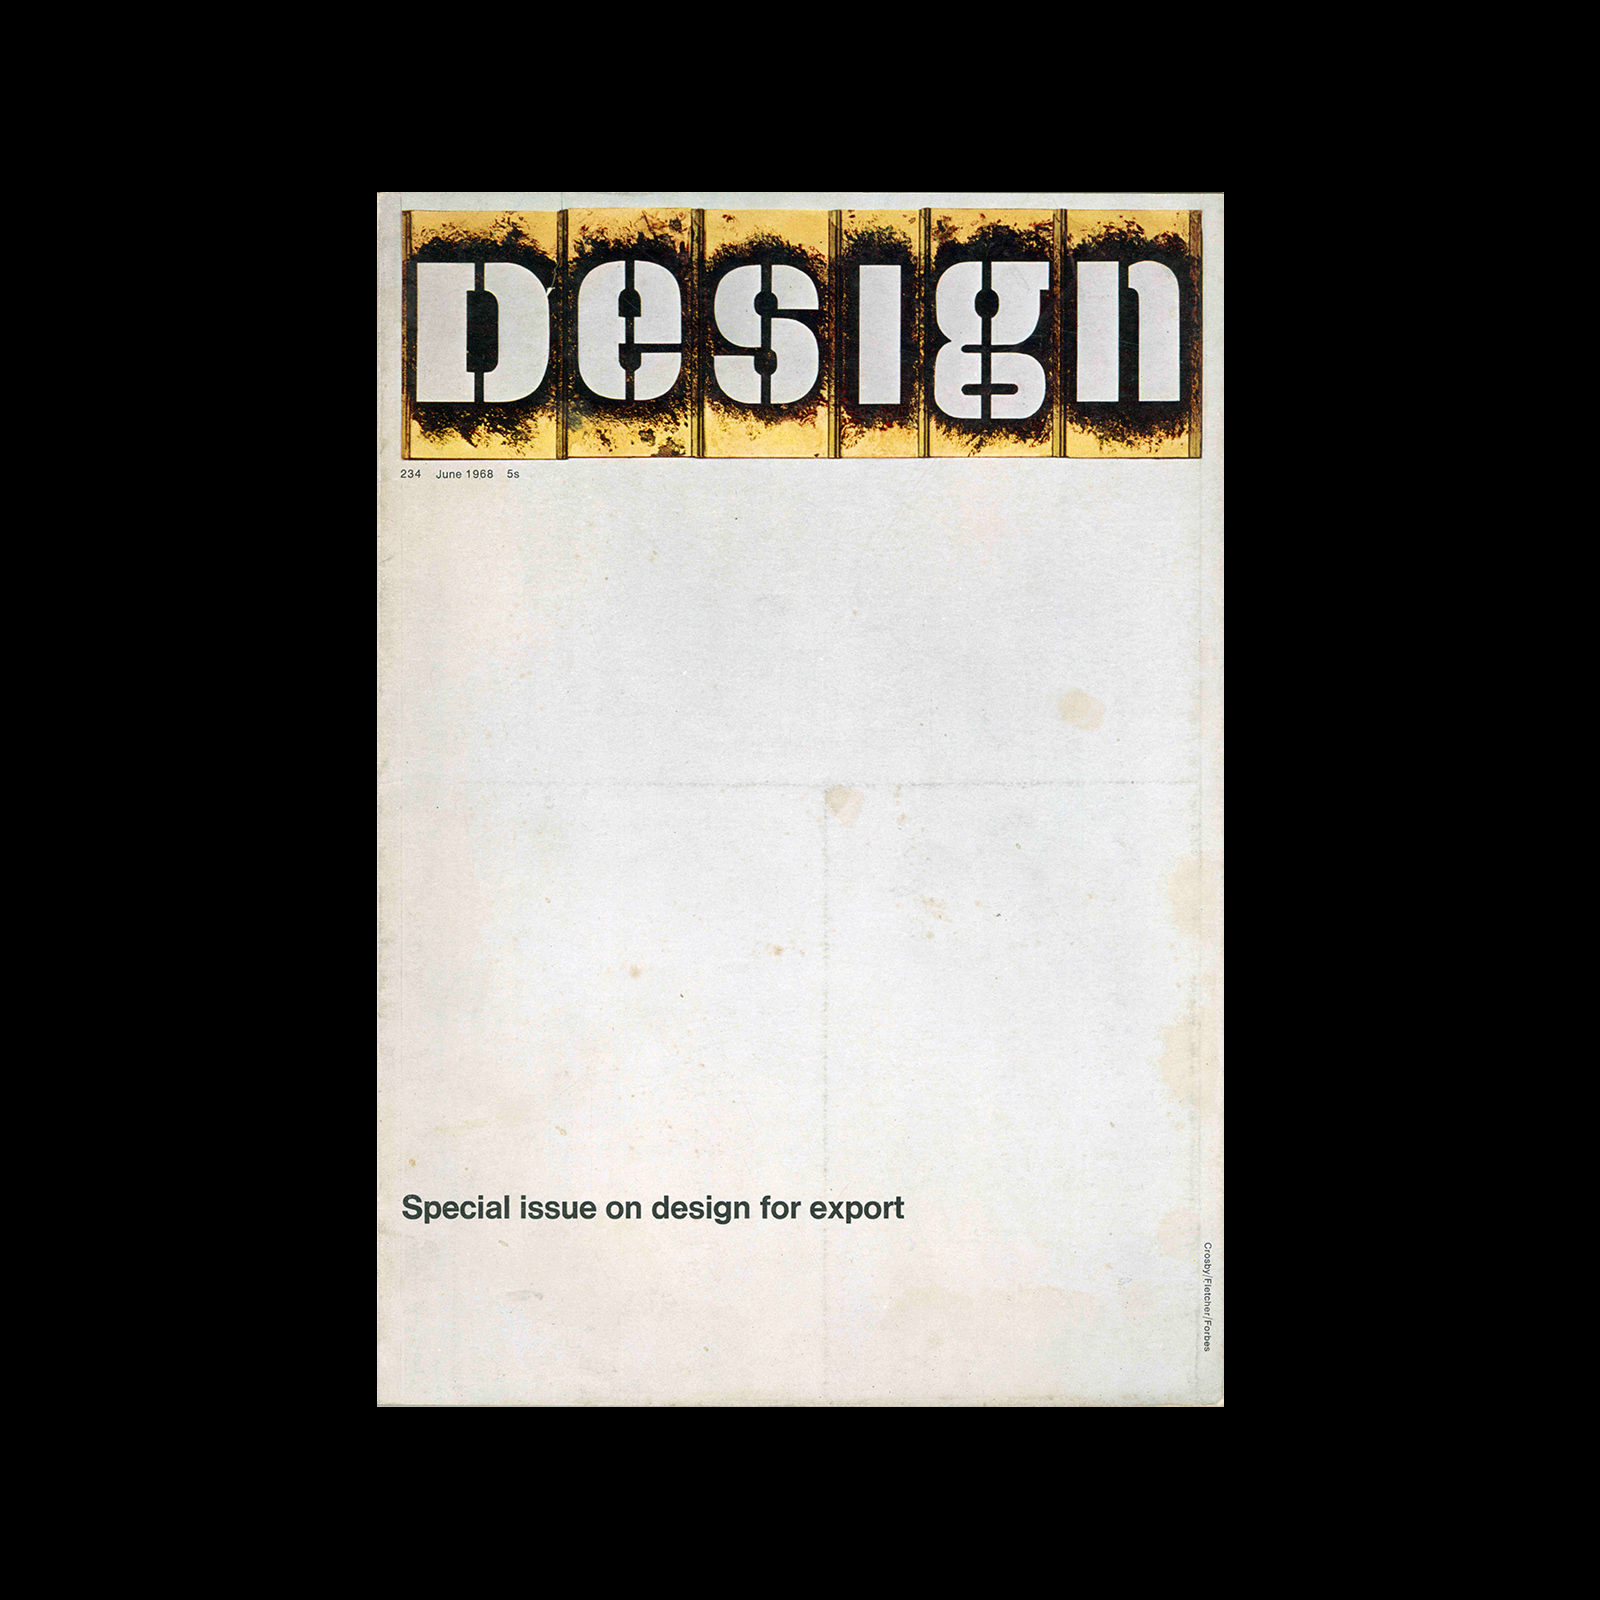 Design, Council of Industrial Design, 234, June 1968. Cover design by Crosby/Fletcher/Forbes